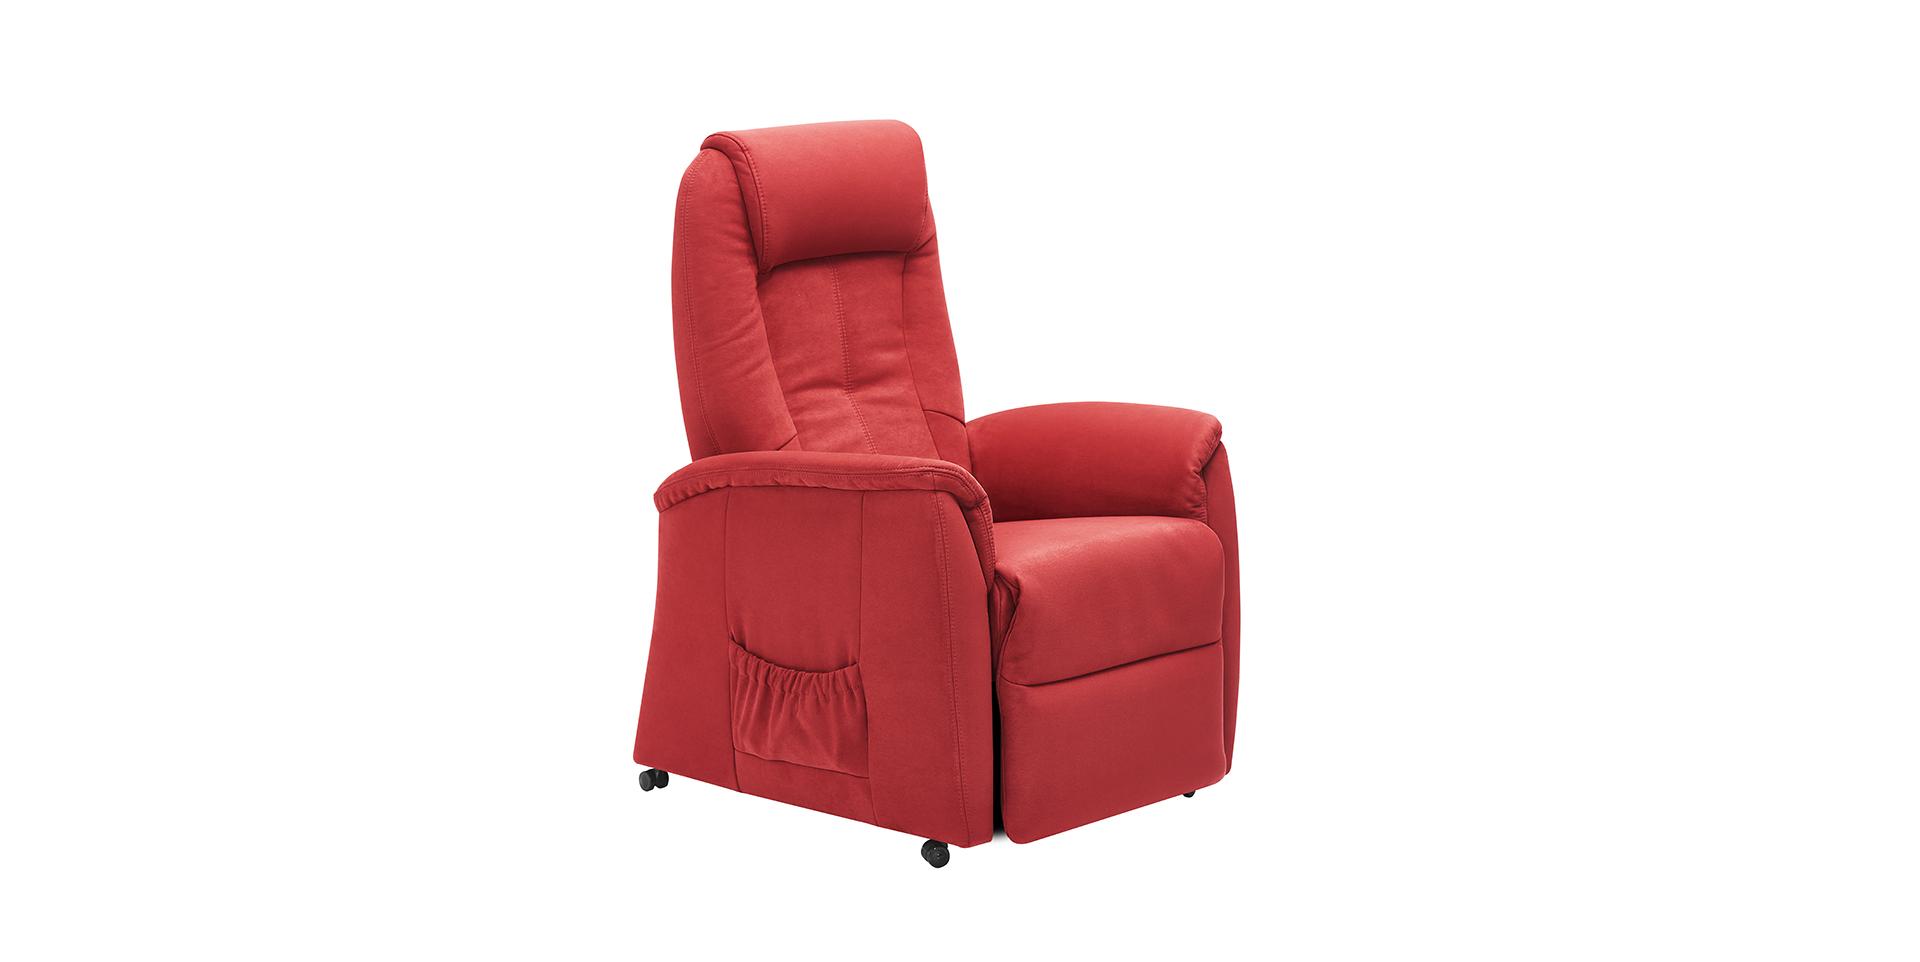 Slider Fauteuil relaxation 9107 (image 4)